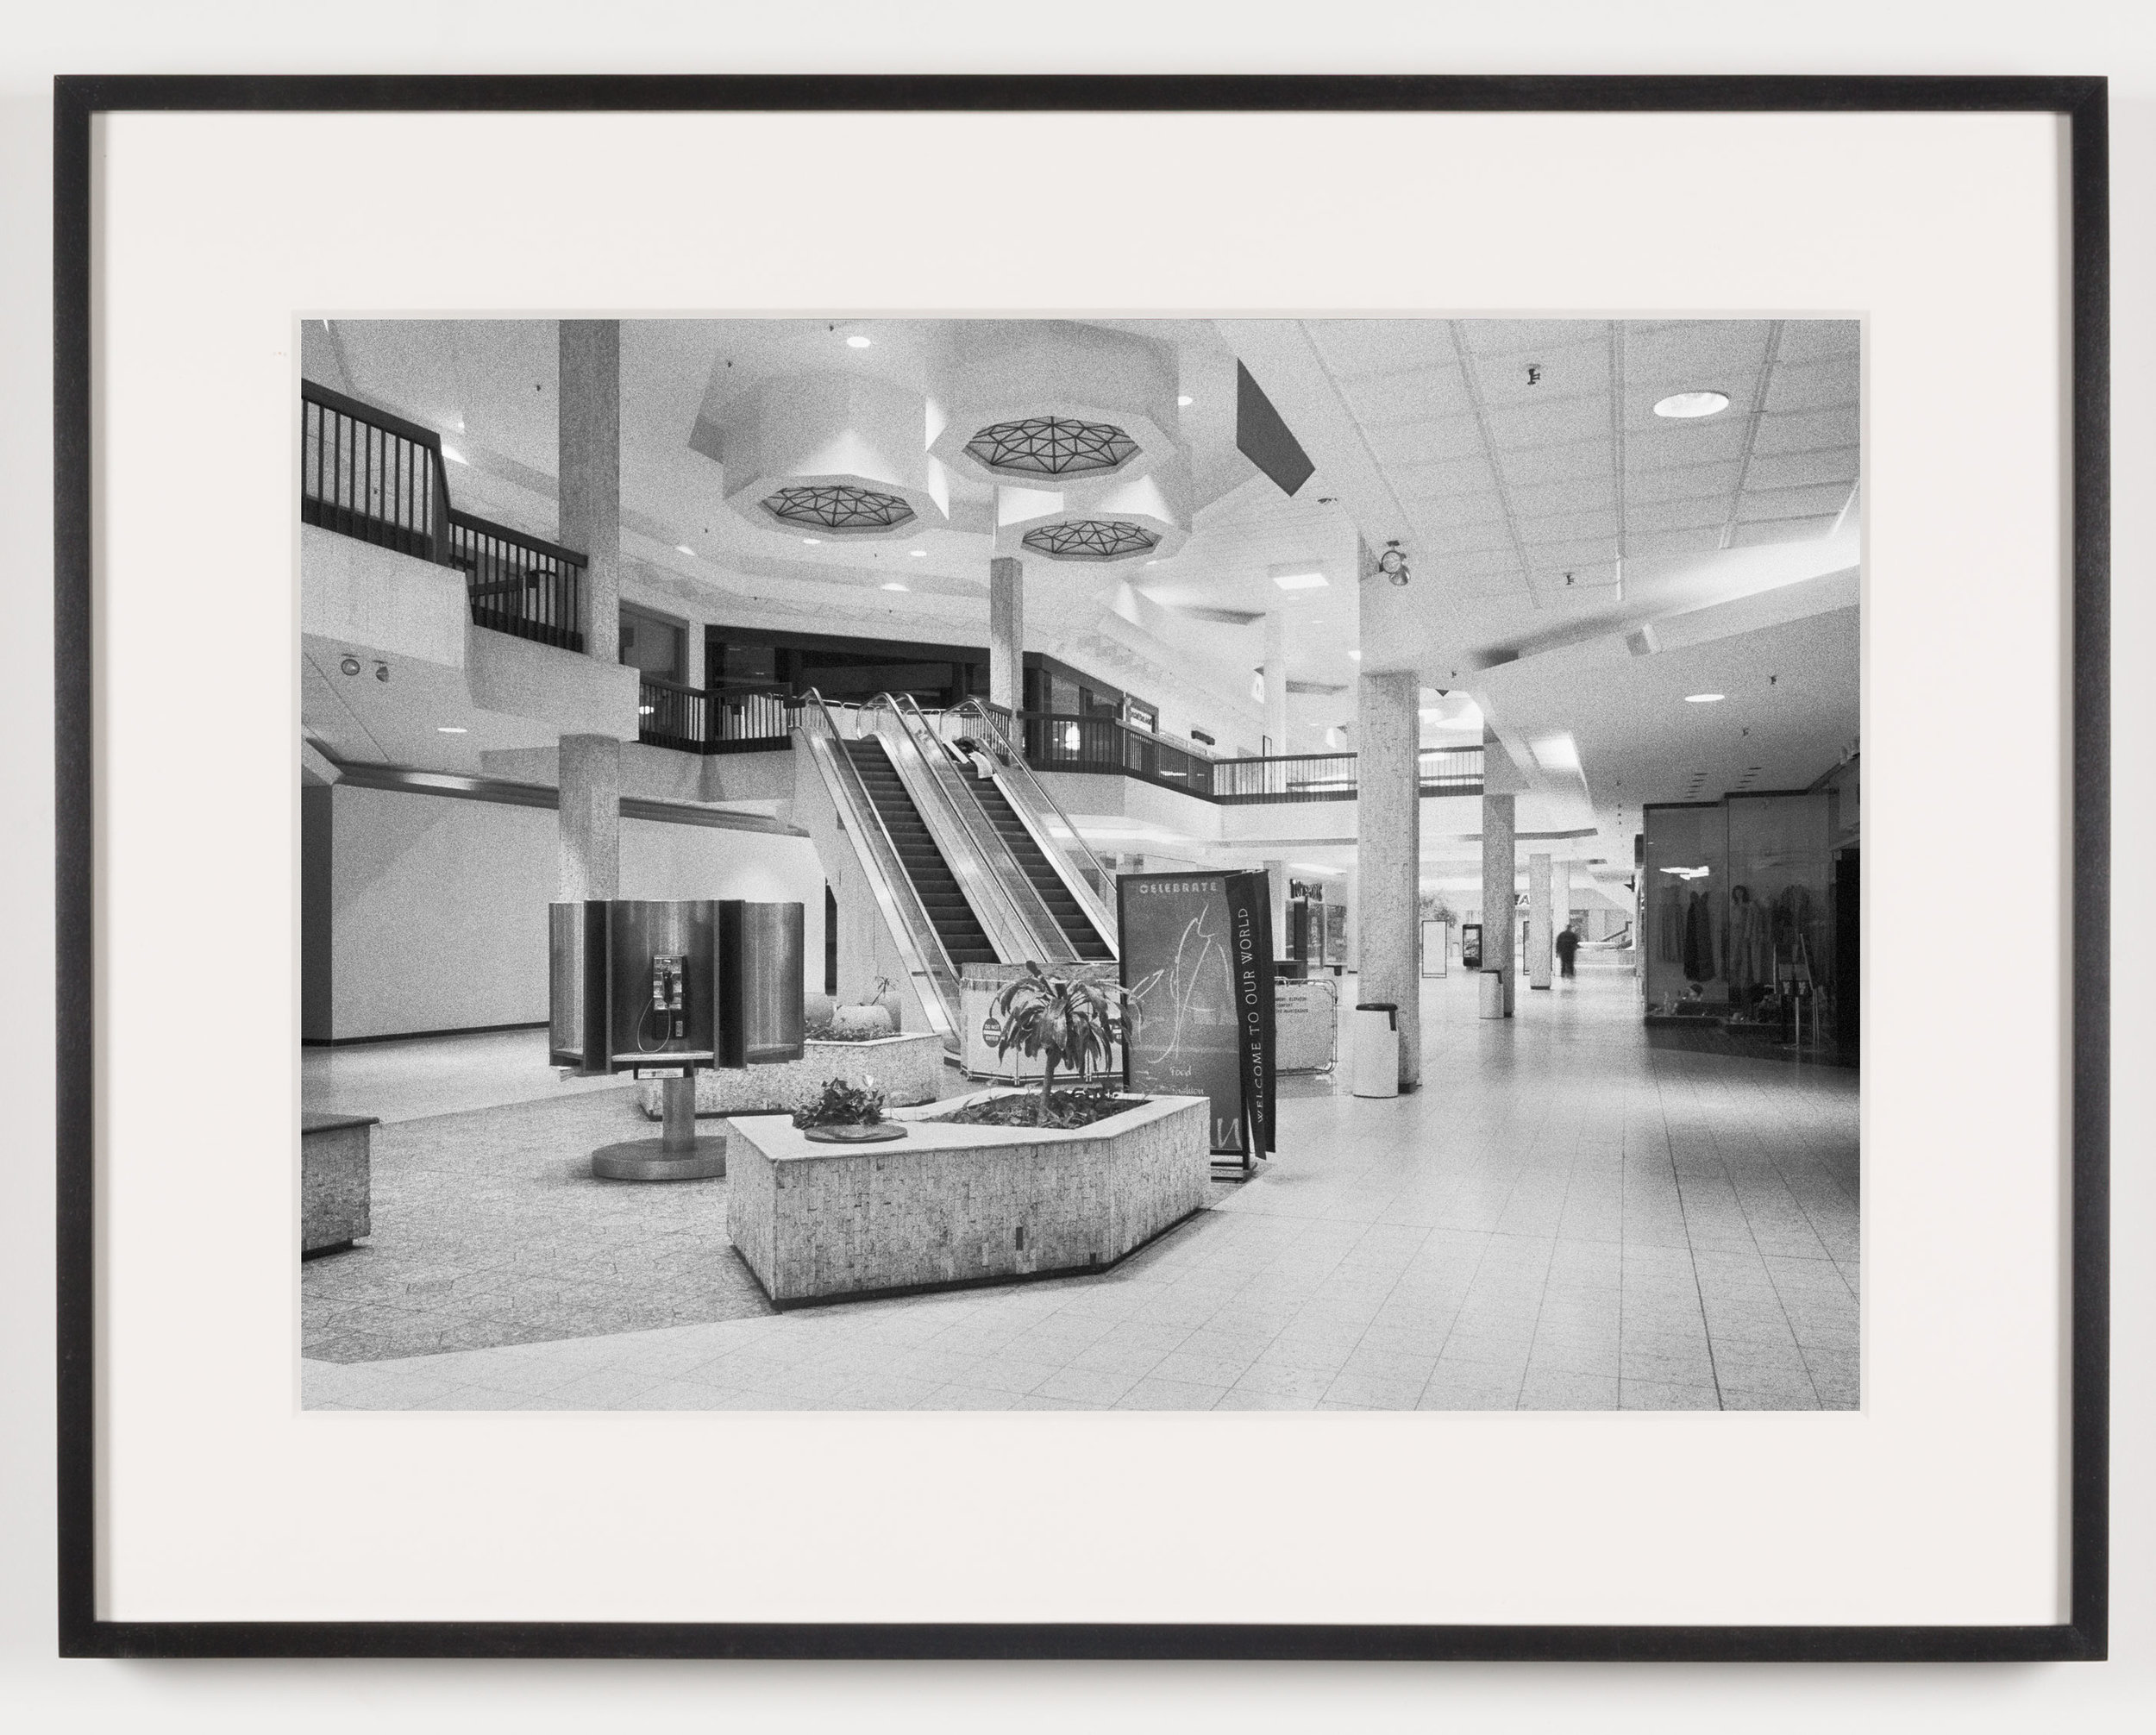   Randall Park Mall (View of Interior), North Randall, OH, Est. 1976, Demo. 2014   2011  Epson Ultrachrome K3 archival ink jet print on Hahnemühle Photo Rag paper  21 5/8 x 28 1/8 inches   American Passages, 2001–2011    A Diagram of Forces, 2011    